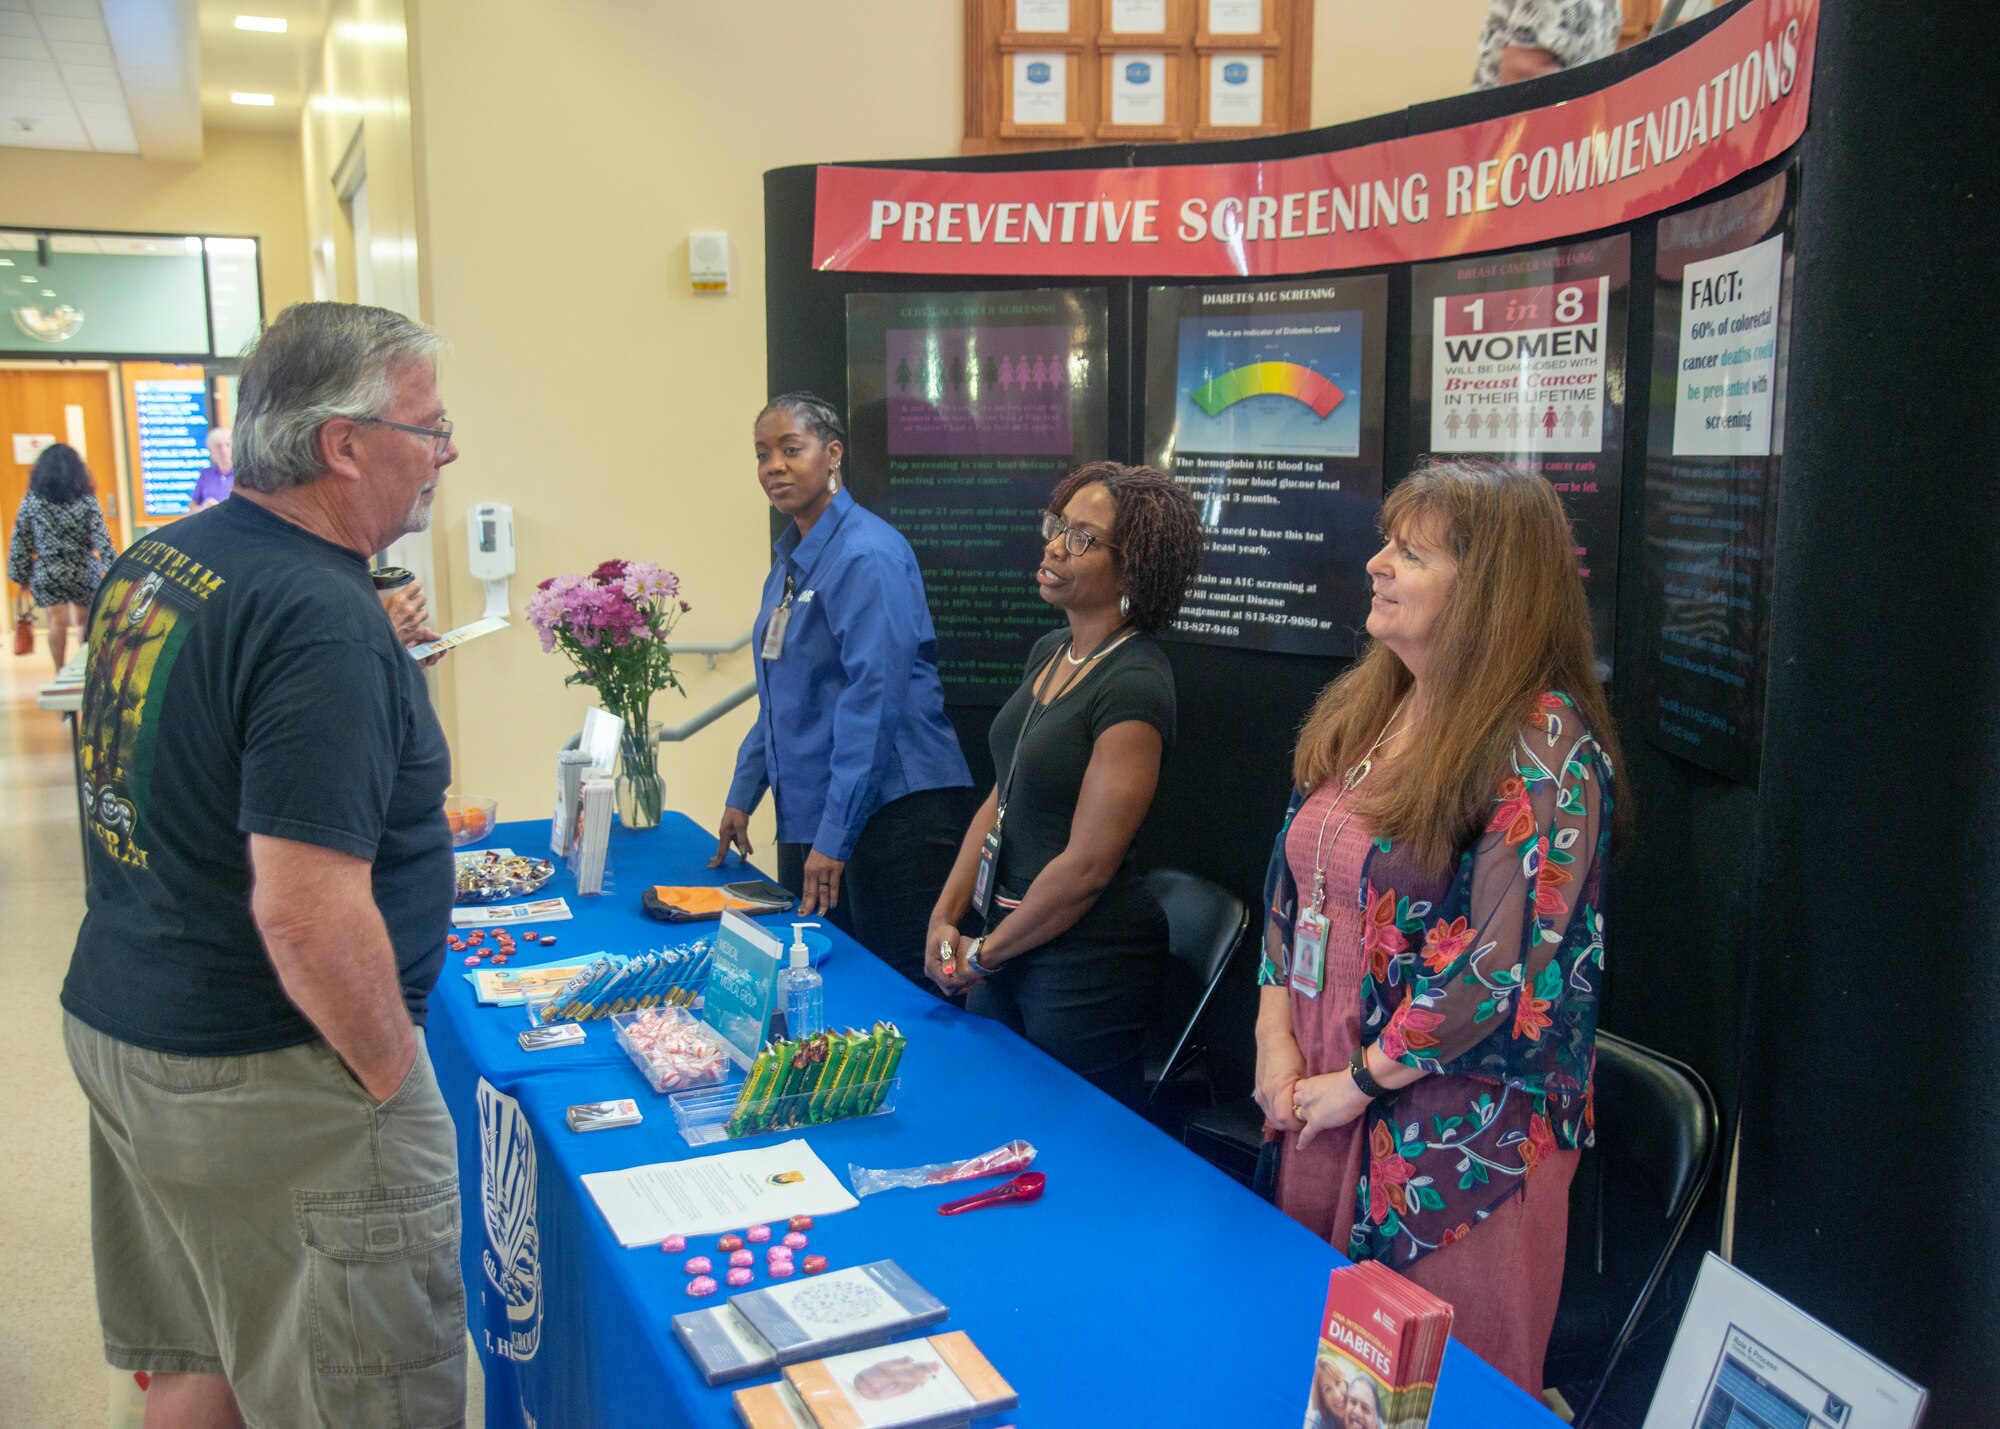 A retiree at MacDill Air Force Base asks a question about preventive screening during the annual Retirement Appreciation Day event Feb. 22, 2020, at MacDill Air Force Base, Fla.